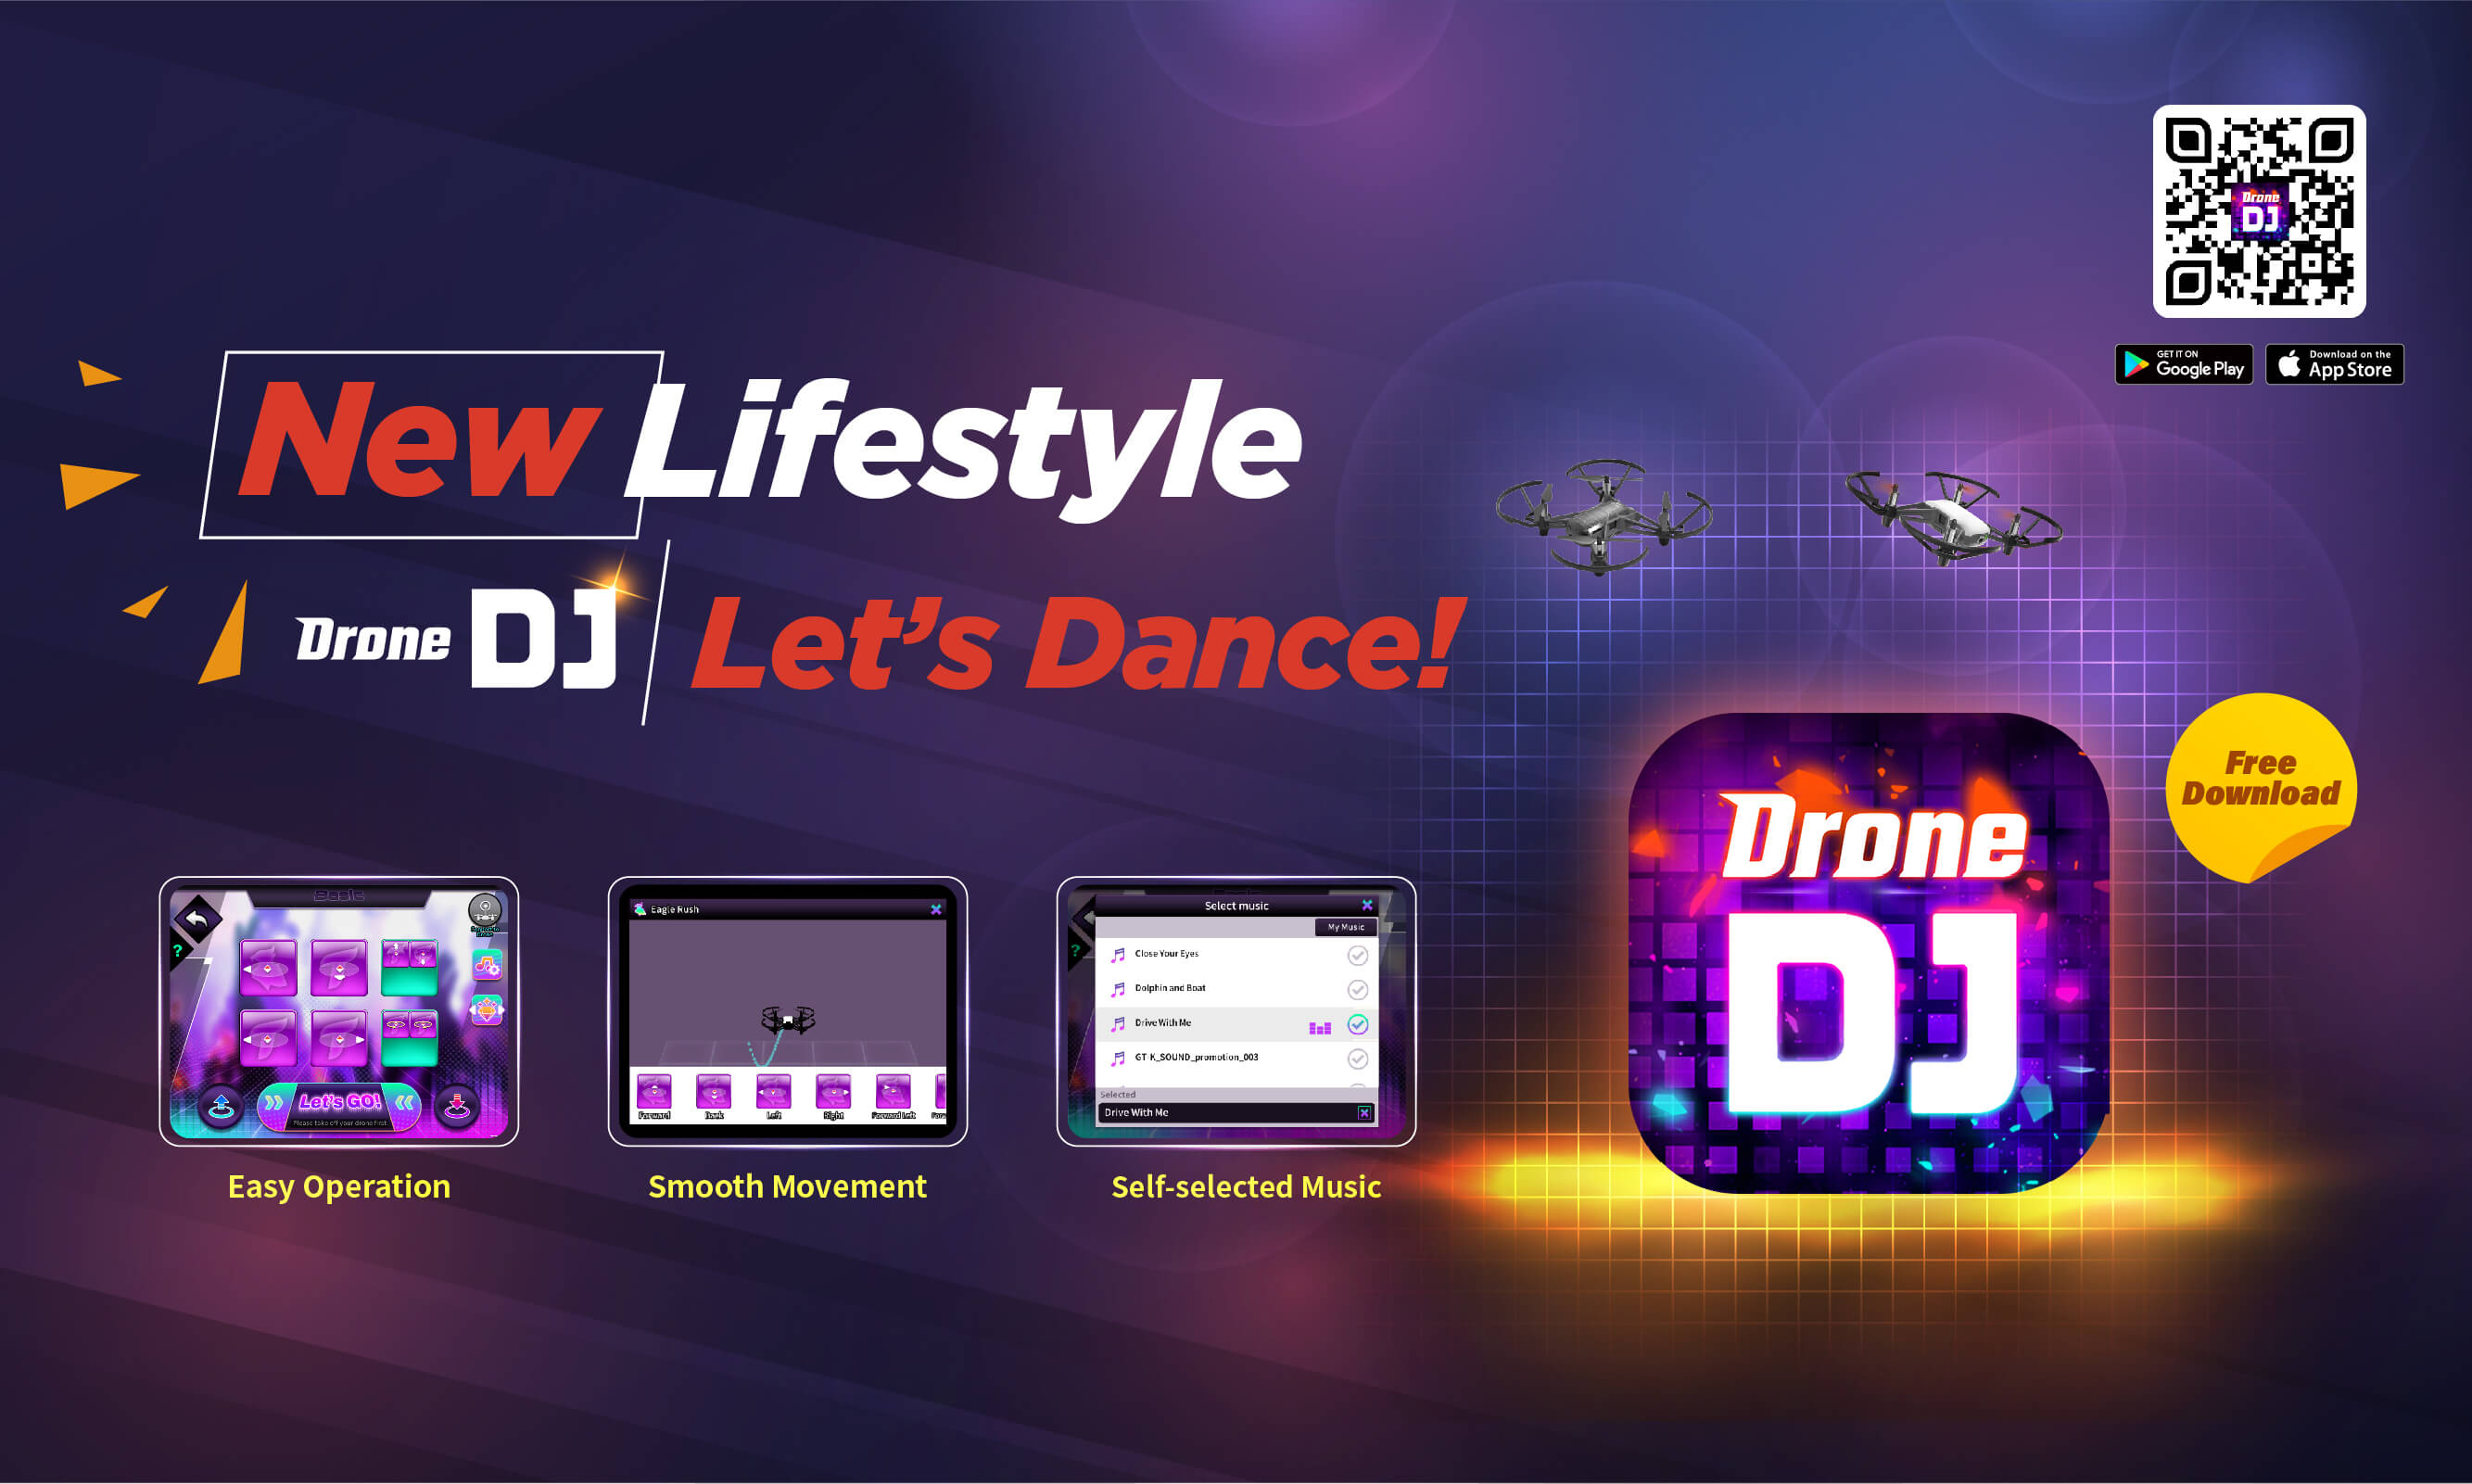 New Lifestyle<br>Drone DJ/Let's Dance!<br>APP download:http://onelink.to/zx36ev